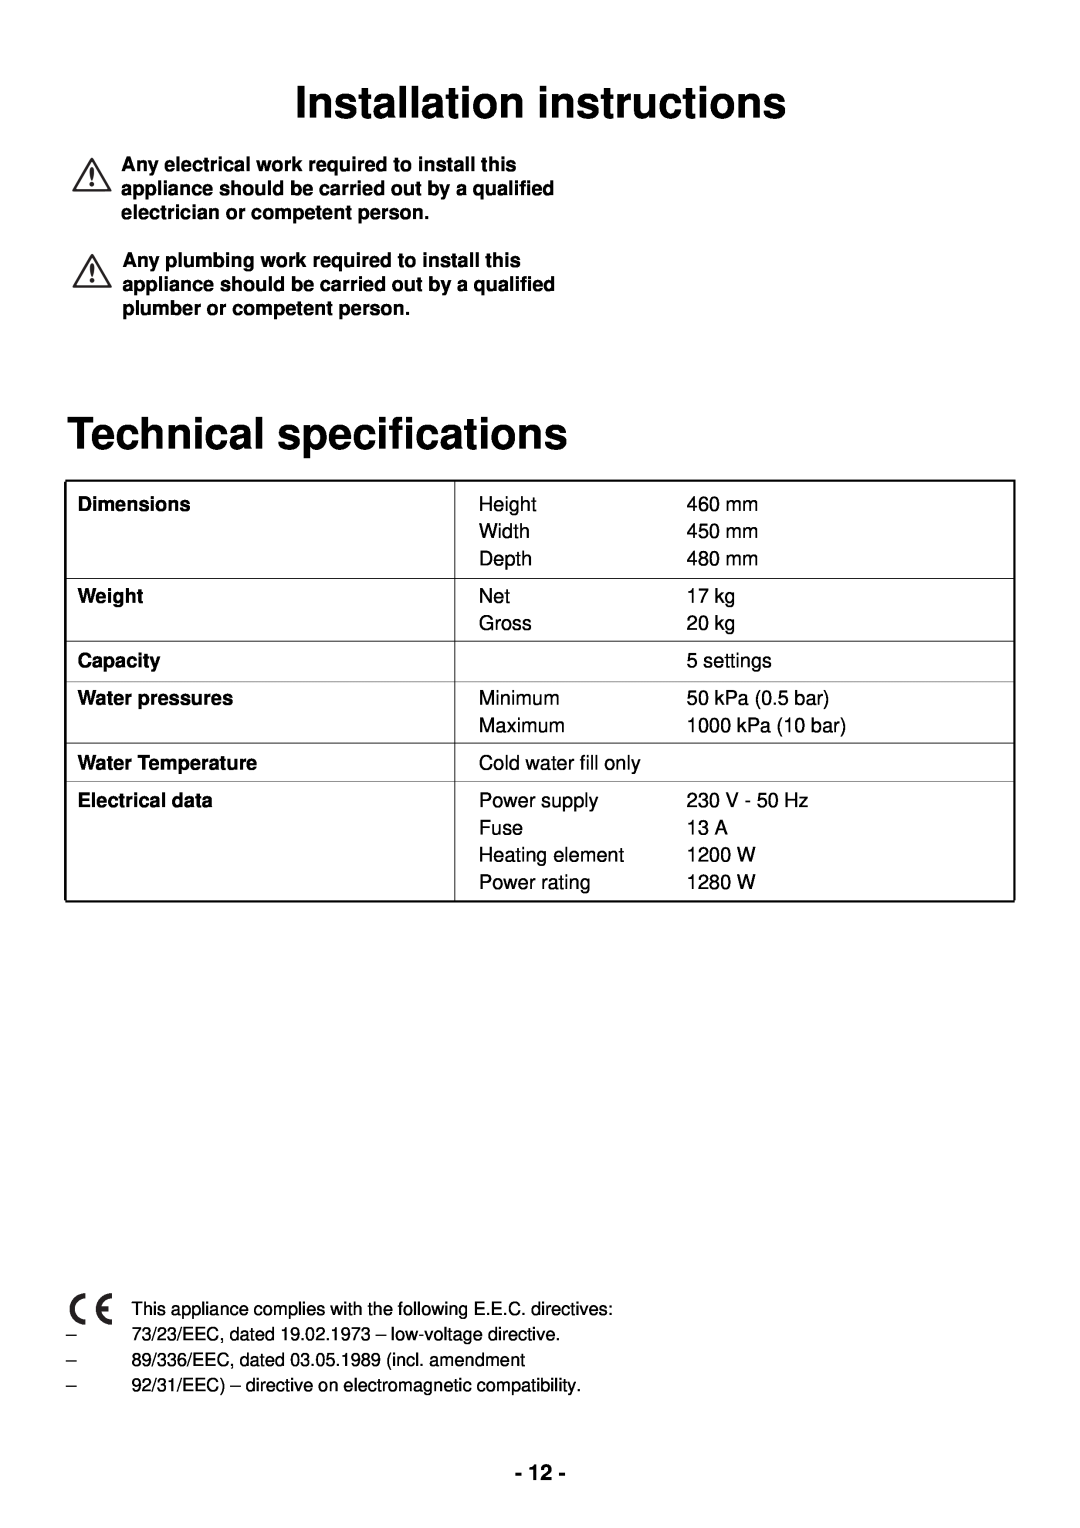 Zanussi ZSF 2400 manual Installation instructions, Technical speciﬁcations 